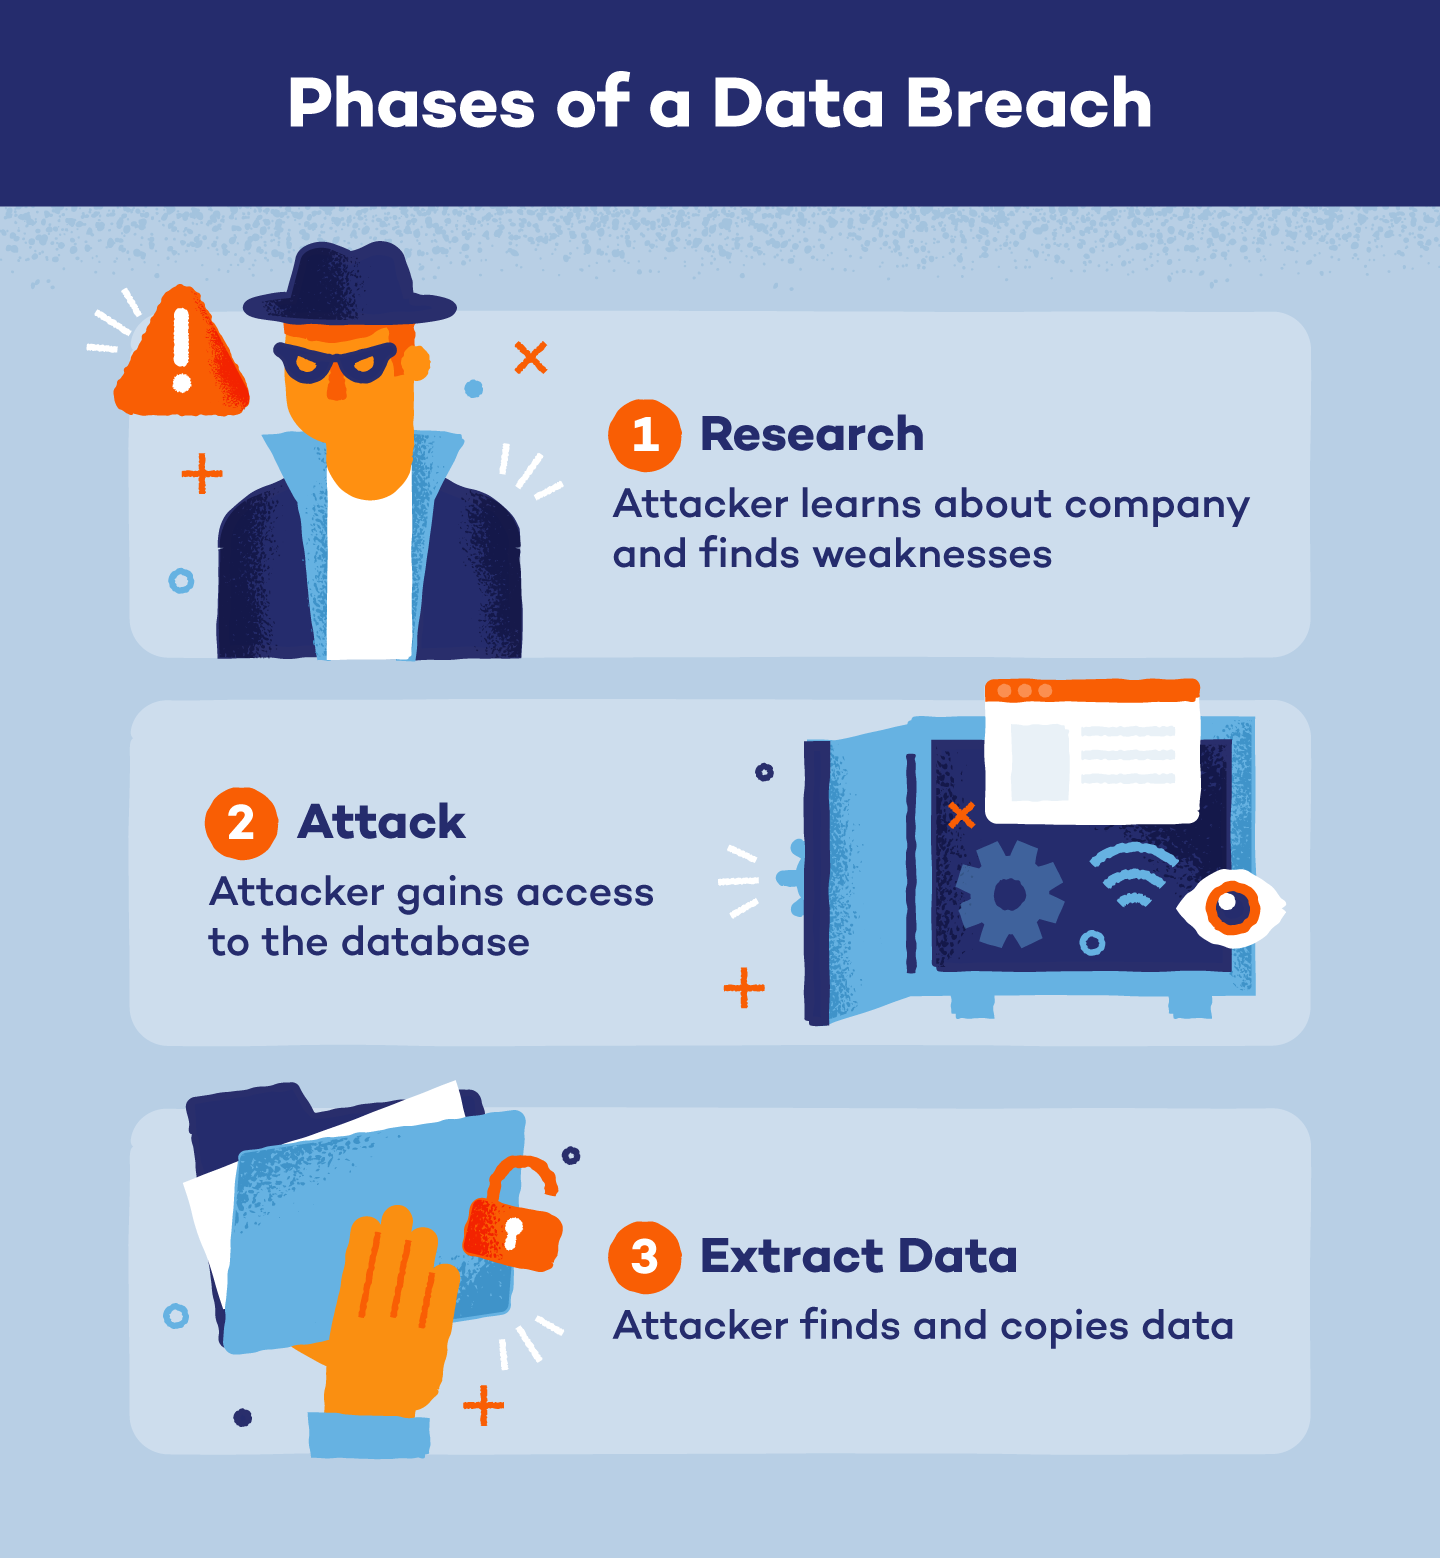 Research, attack, and extract data are the stages of a data beach.